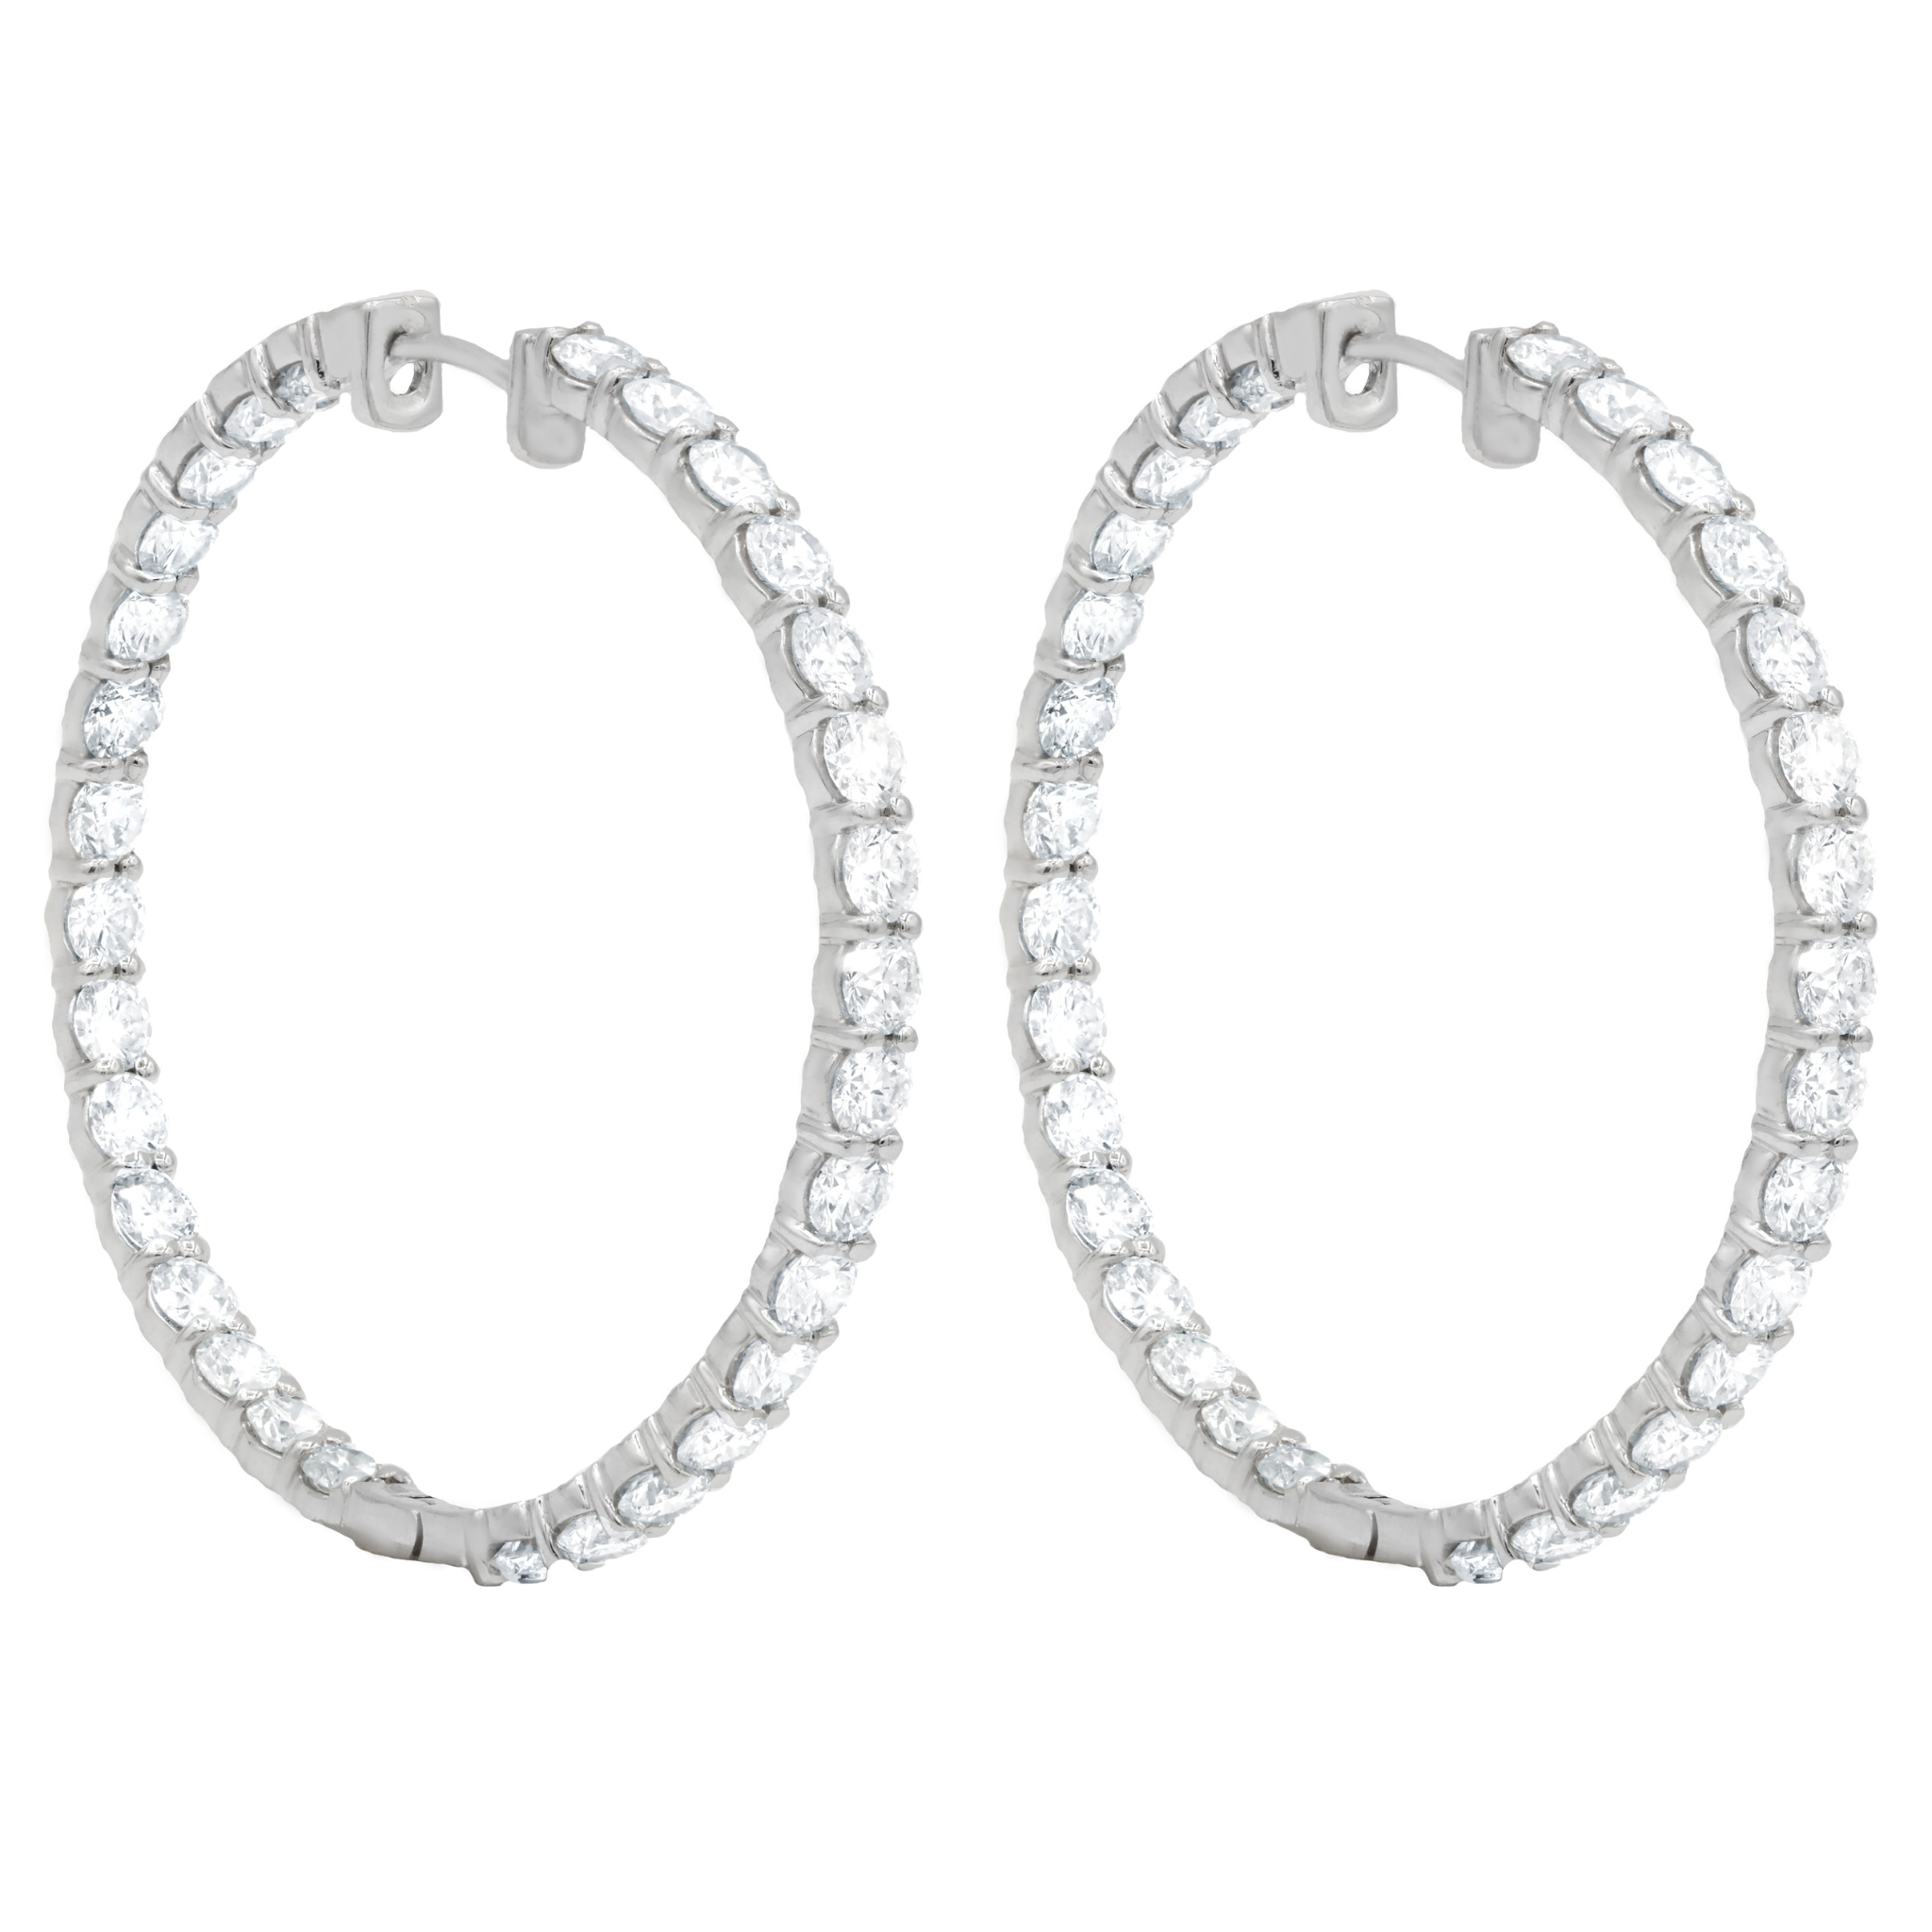 14 Kt White Gold 1.50" Hoop Earrings with 5.45 cts.jpg